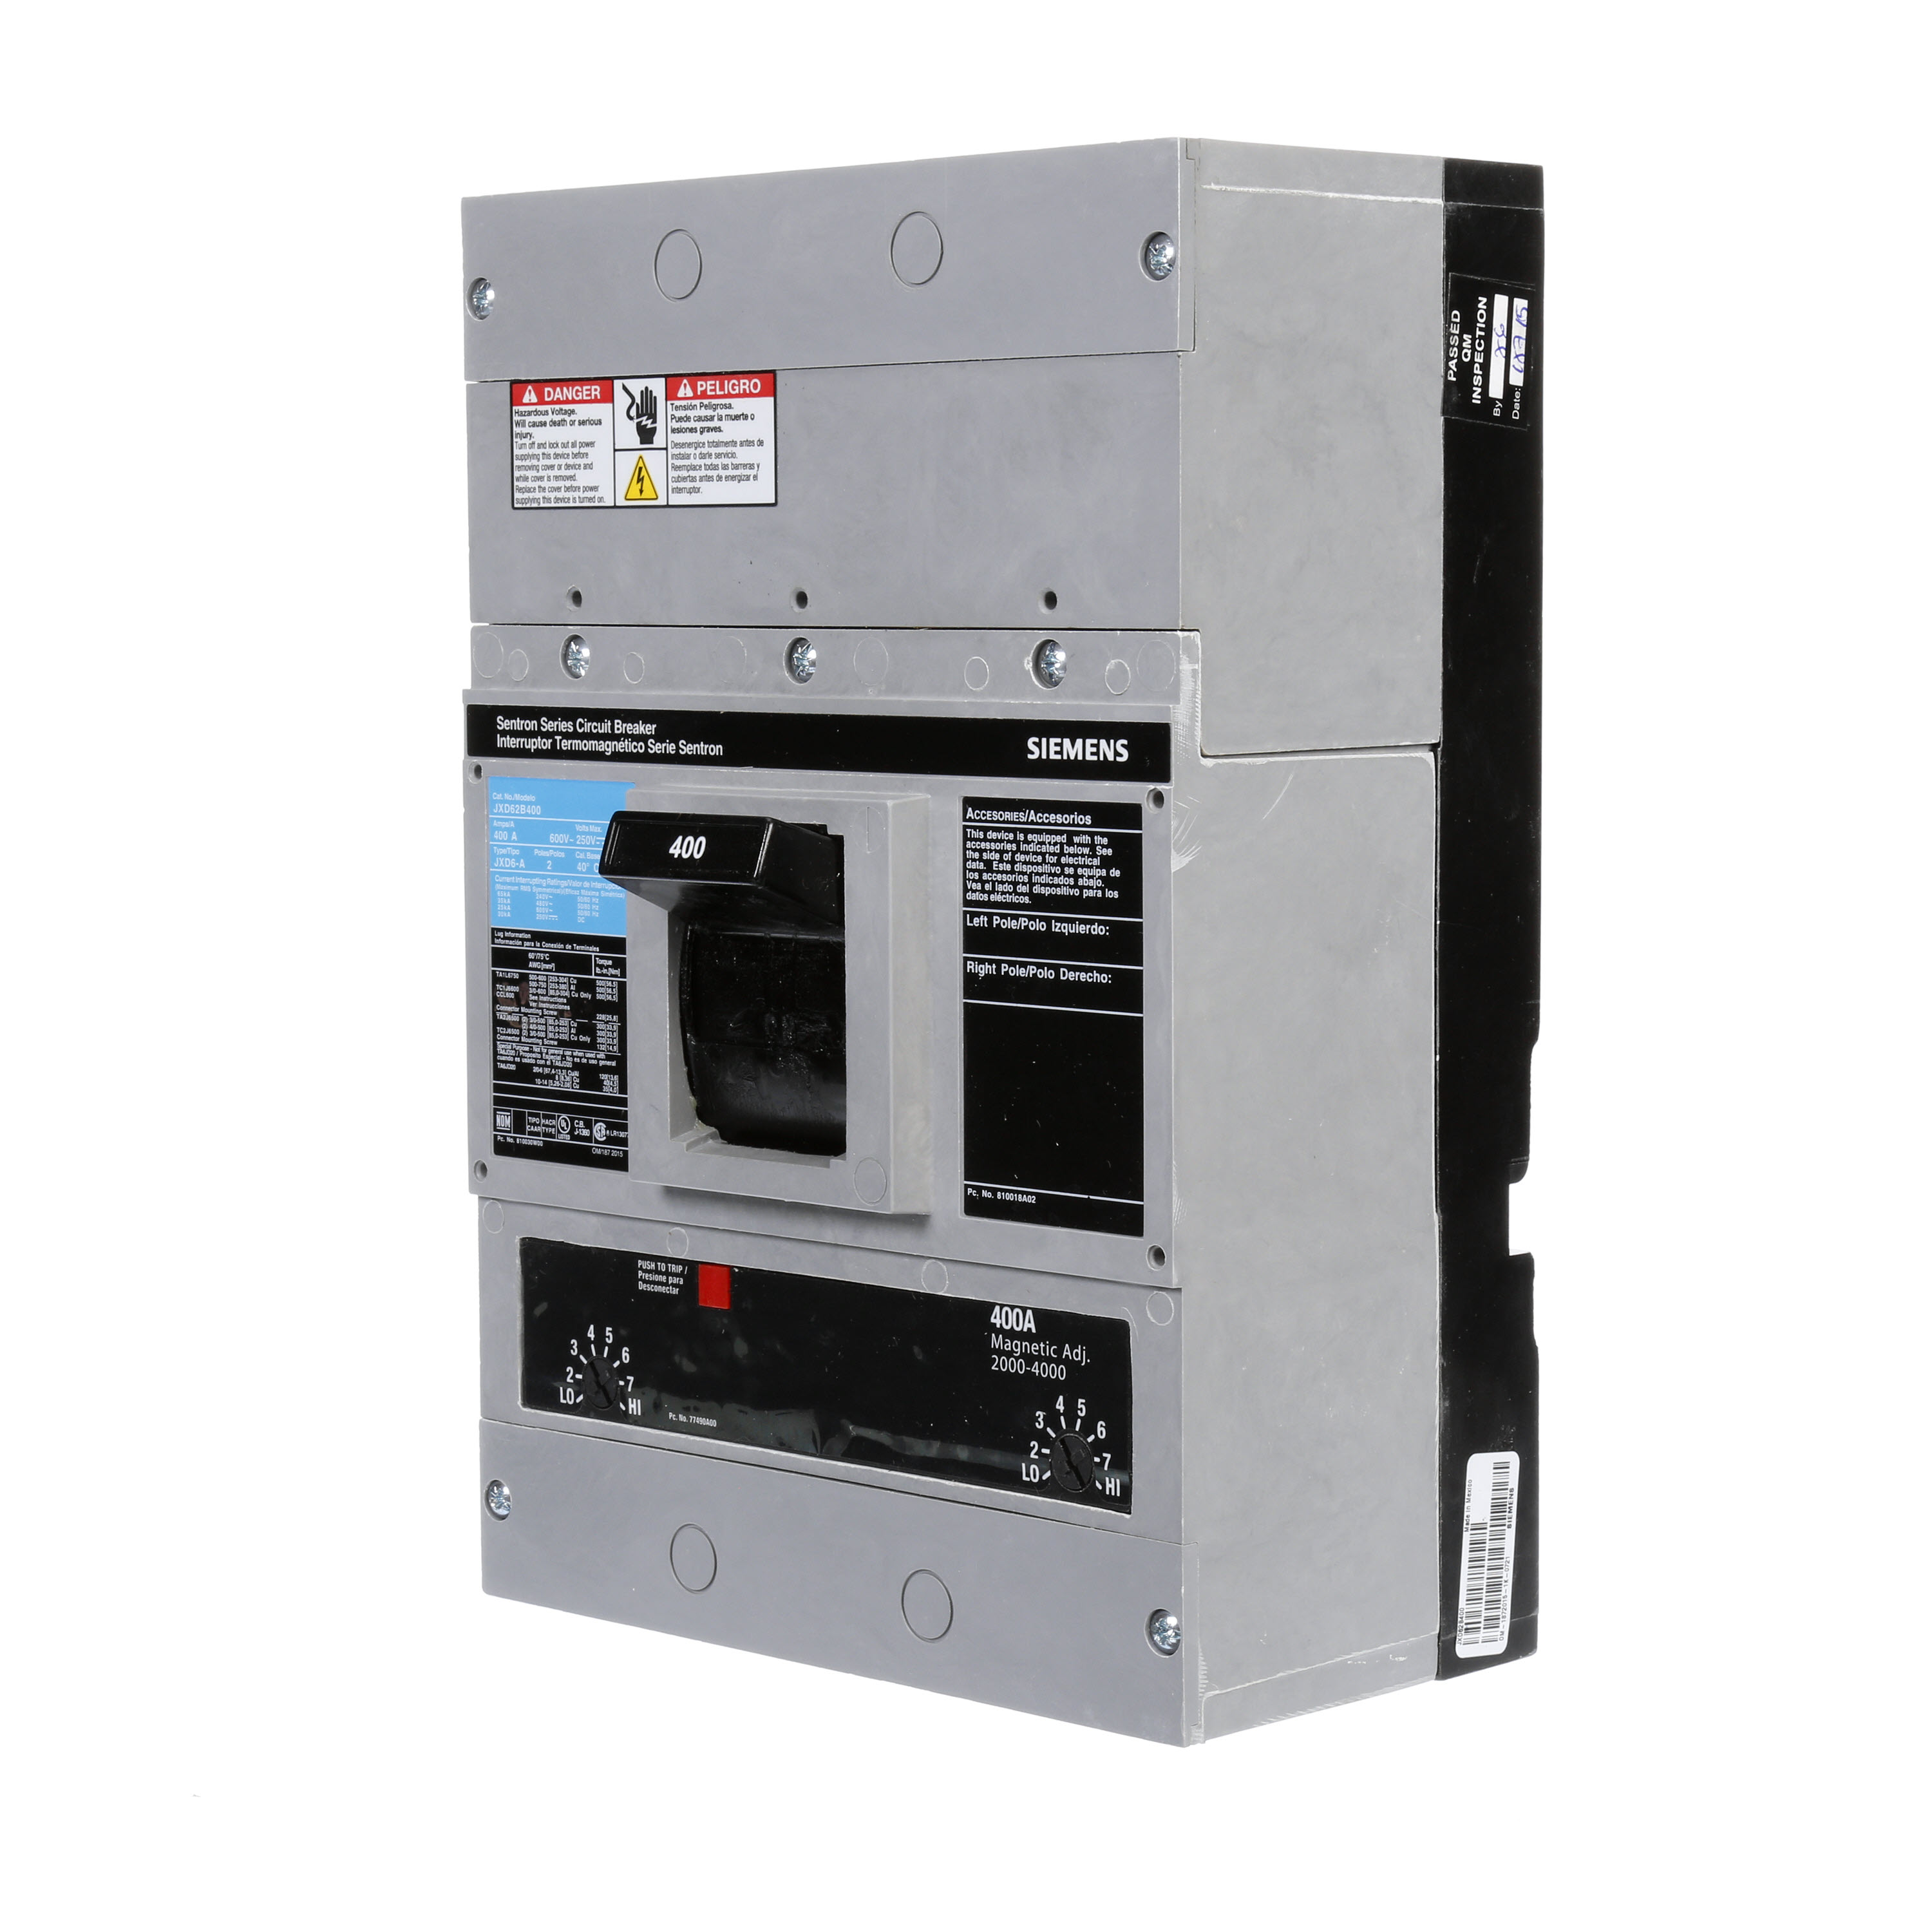 SIEMENS LOW VOLTAGE SENTRON MOLDED CASE CIRCUIT BREAKER WITH THERMAL - MAGNETICTRIP UNIT. ASSEMBLED STANDARD 40 DEG C BREAKER JD FRAME WITH STANDARD BREAKING CAPACITY. 400A 2-POLE (25KAIC AT 600V) (35KAIC AT 480V). NON-INTERCHANGEABLE TRIP UNIT. SPECIAL FEATURES NO LUGS INSTALLED. DIMENSIONS (W x H x D) IN 7.50 x 11.0 x 4.00.